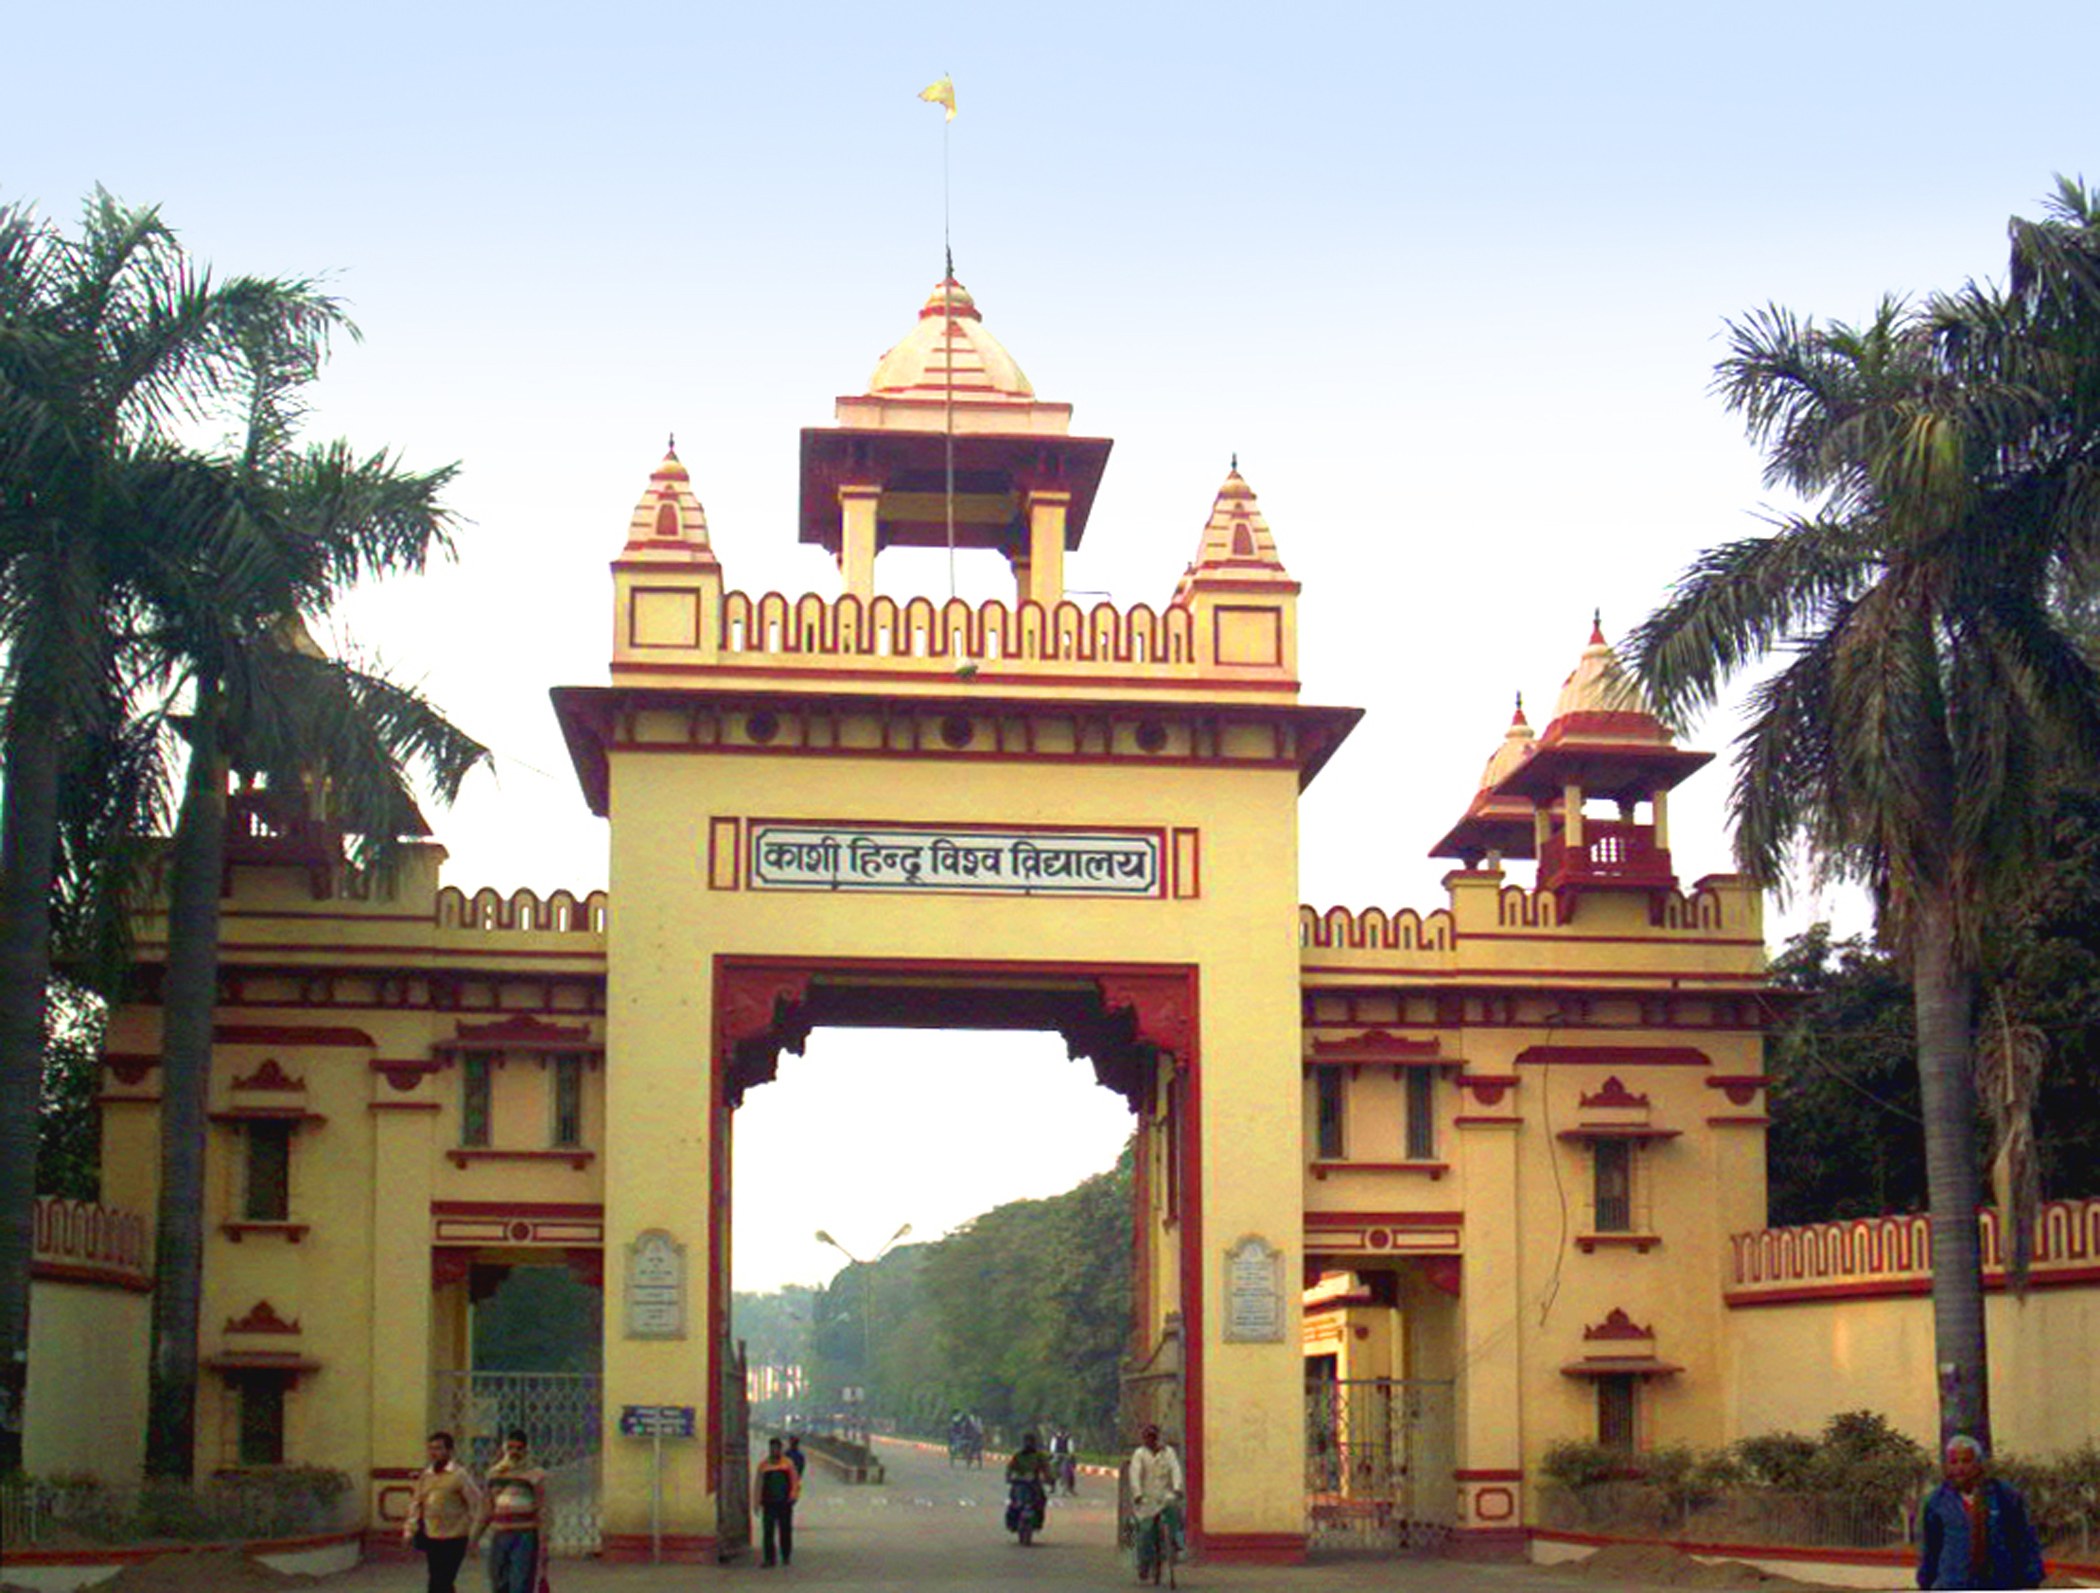 Banaras Hindu University and Sri Sathya Sai University collaborate to promote studies and research in ancient Indian knowledge systems